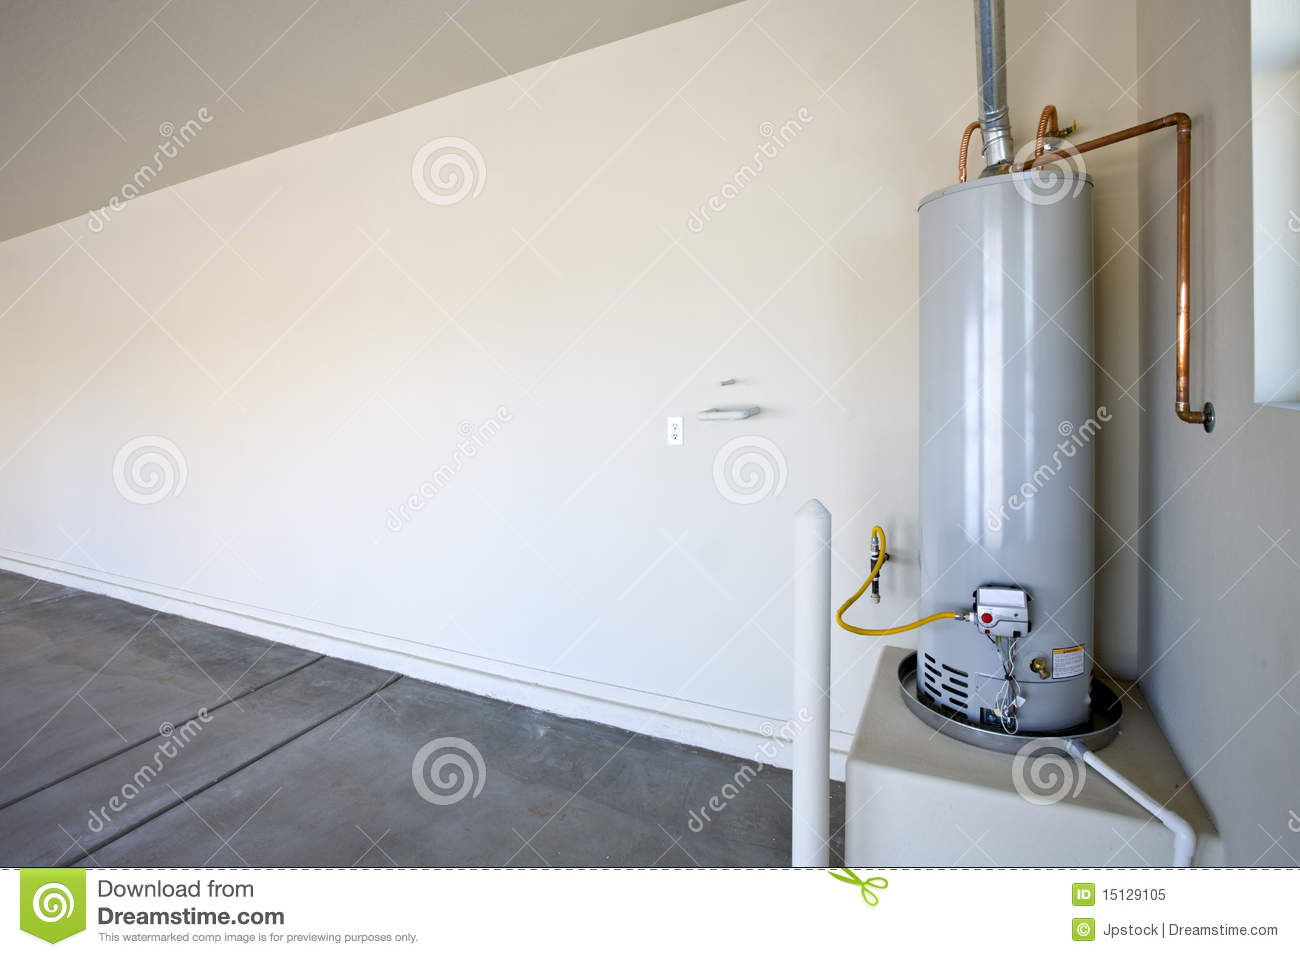 Hot Water Heater In A Garage Royalty Free Stock Photo   Image